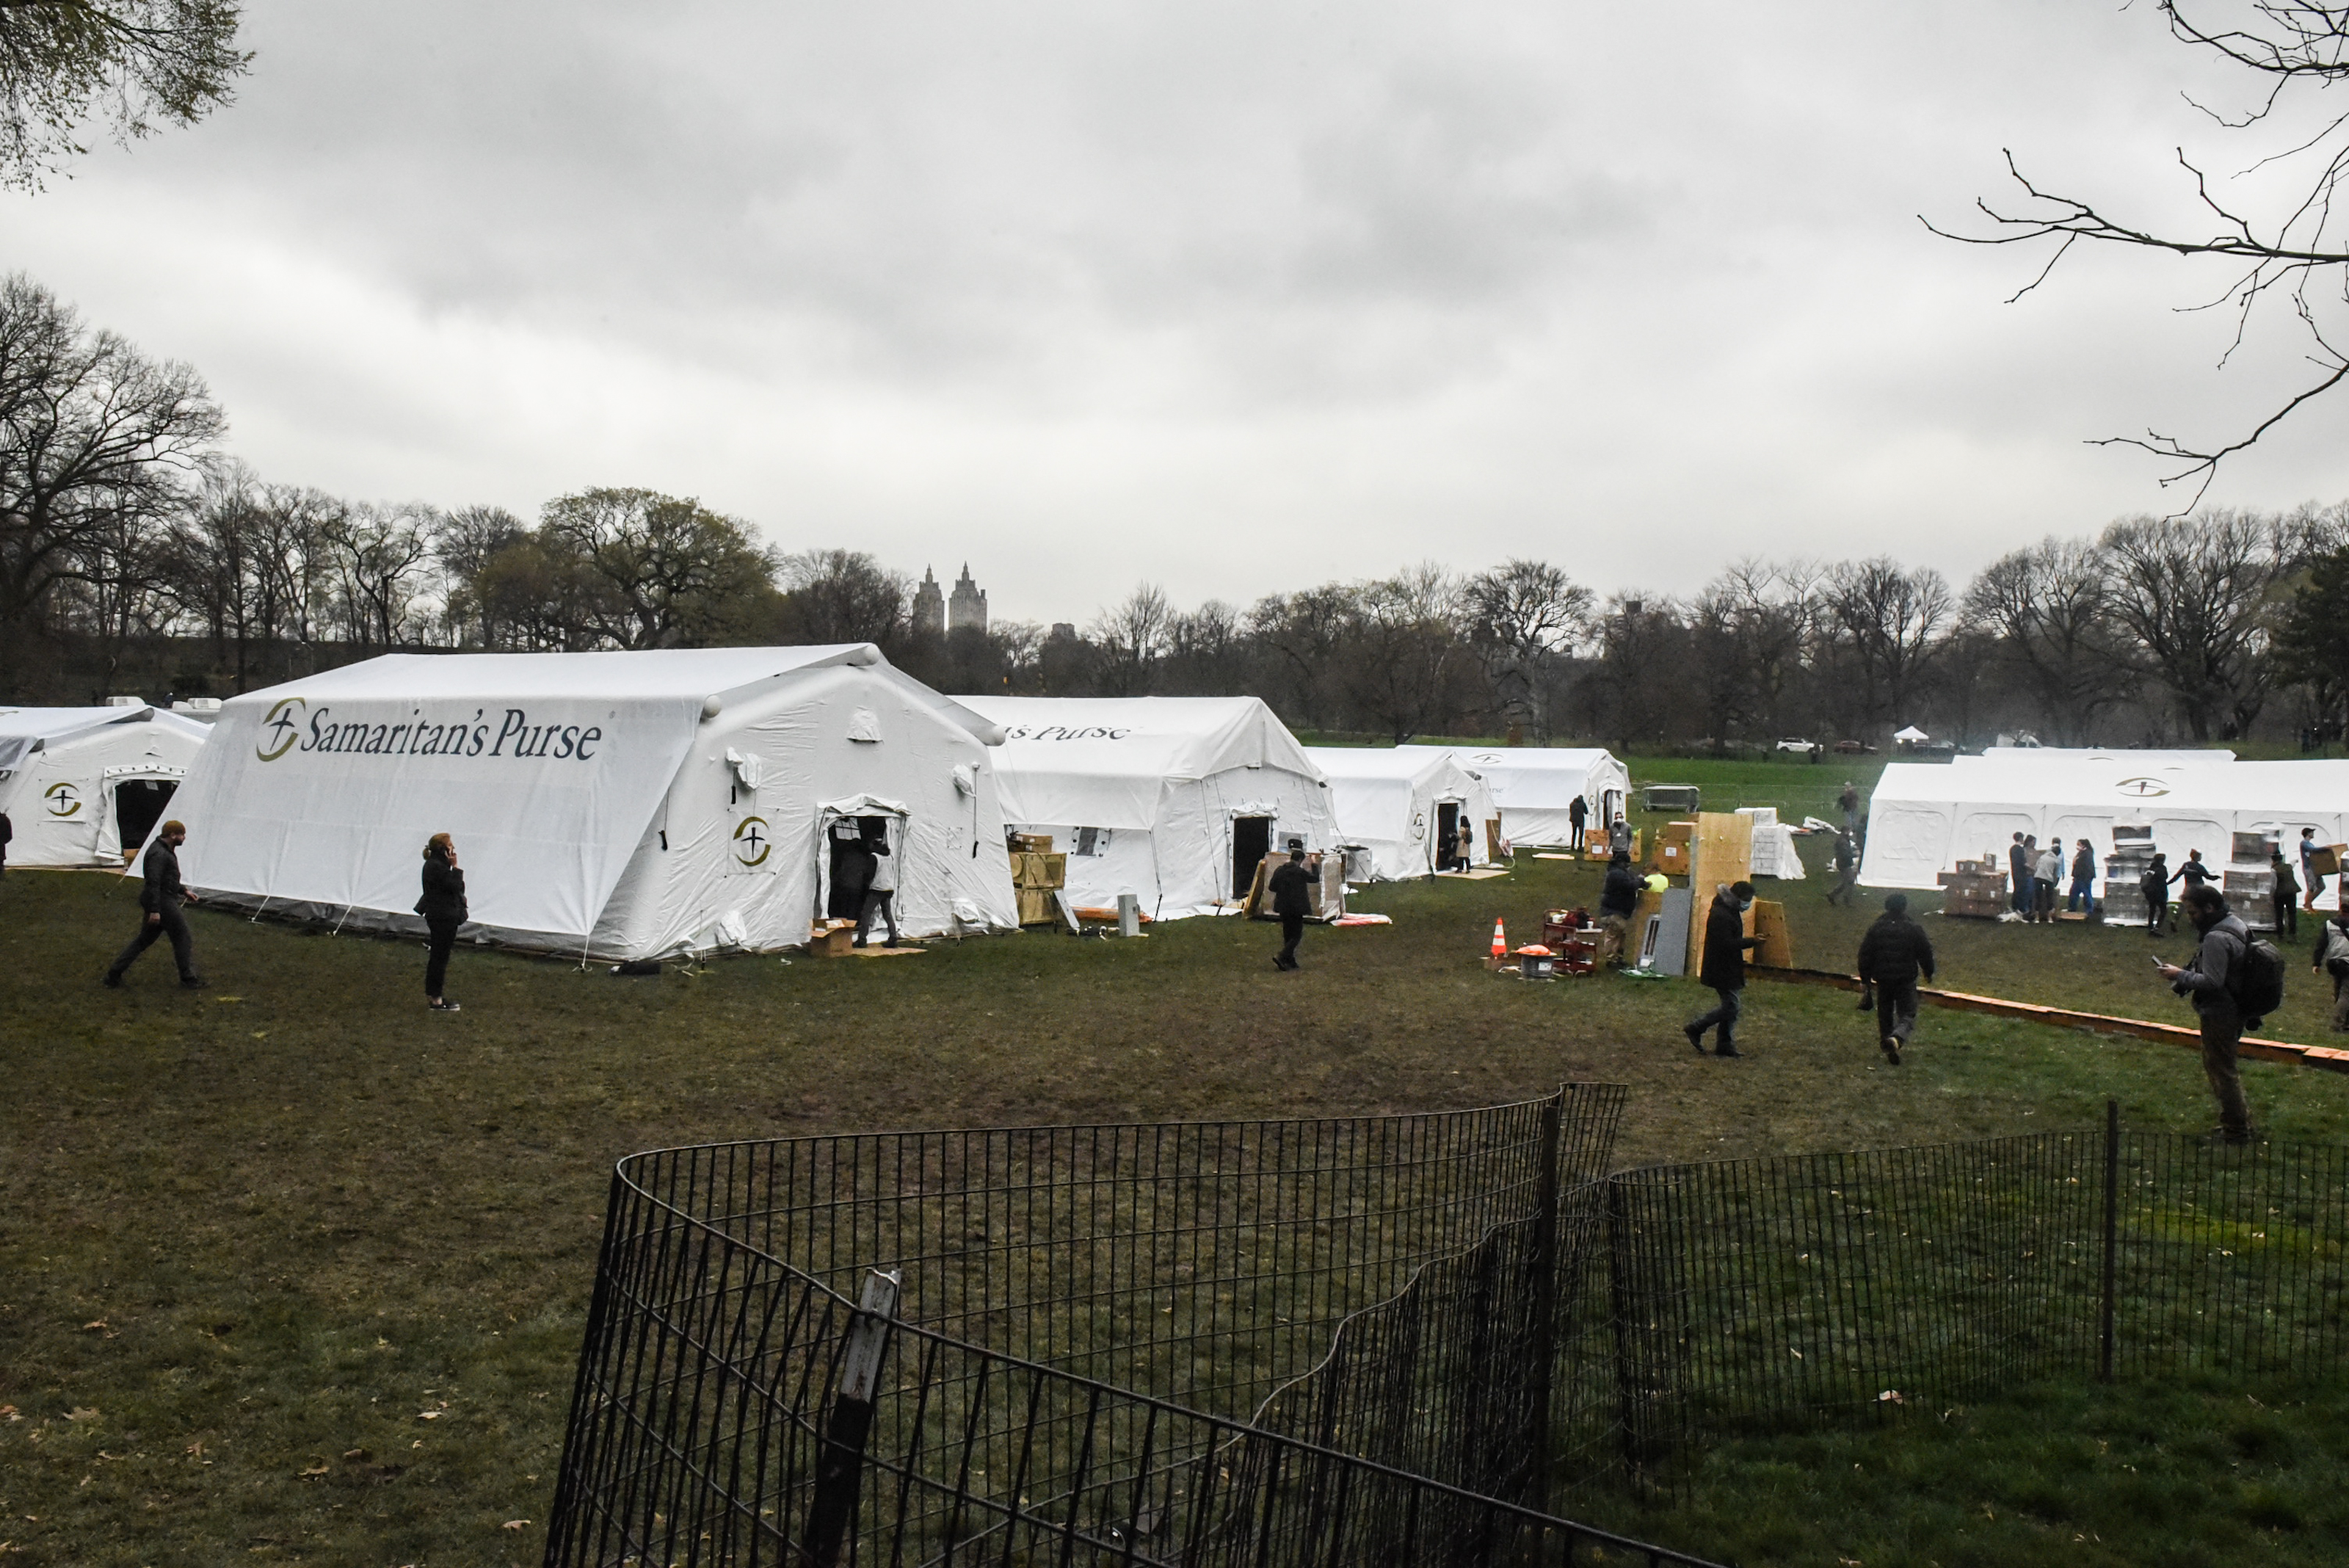 People set up an emergency field hospital to aid in the COVID-19 pandemic in Central Park on March 30, 2020 in New York City. (Stephanie Keith/Getty Images)